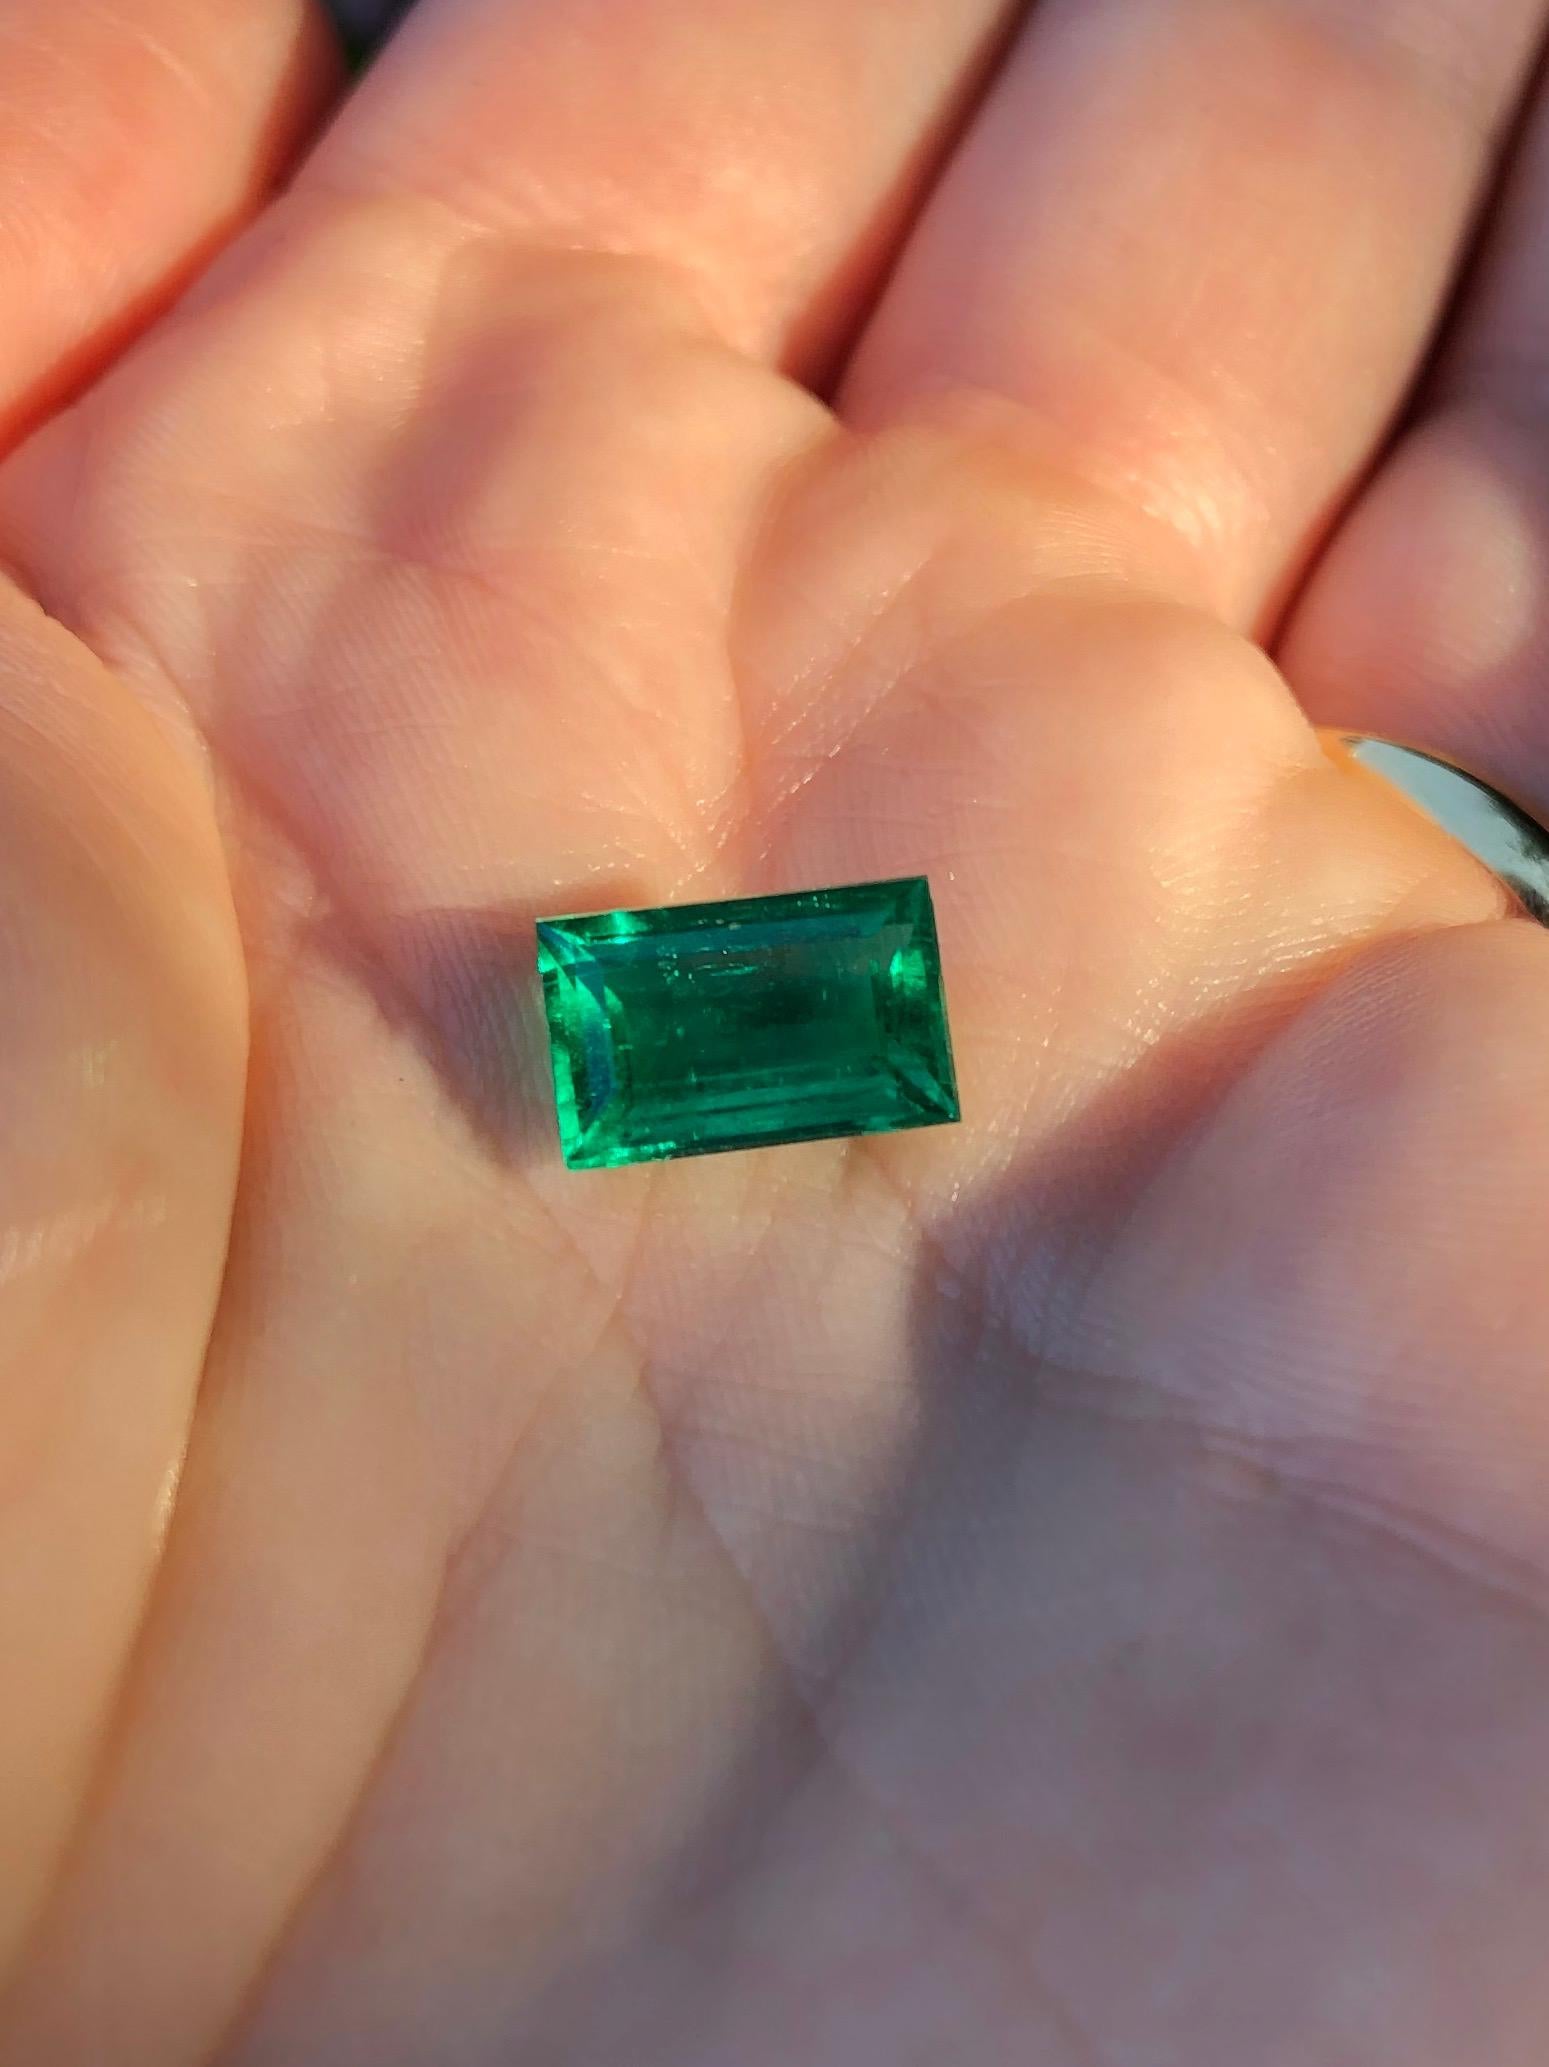 2.80 carat Colombian Emerald in collaboration with IEEX Emeralds, based in Bogotá. We love the cut of this emerald, with perfect corners. It is GRS certified to be minor oil, with an 